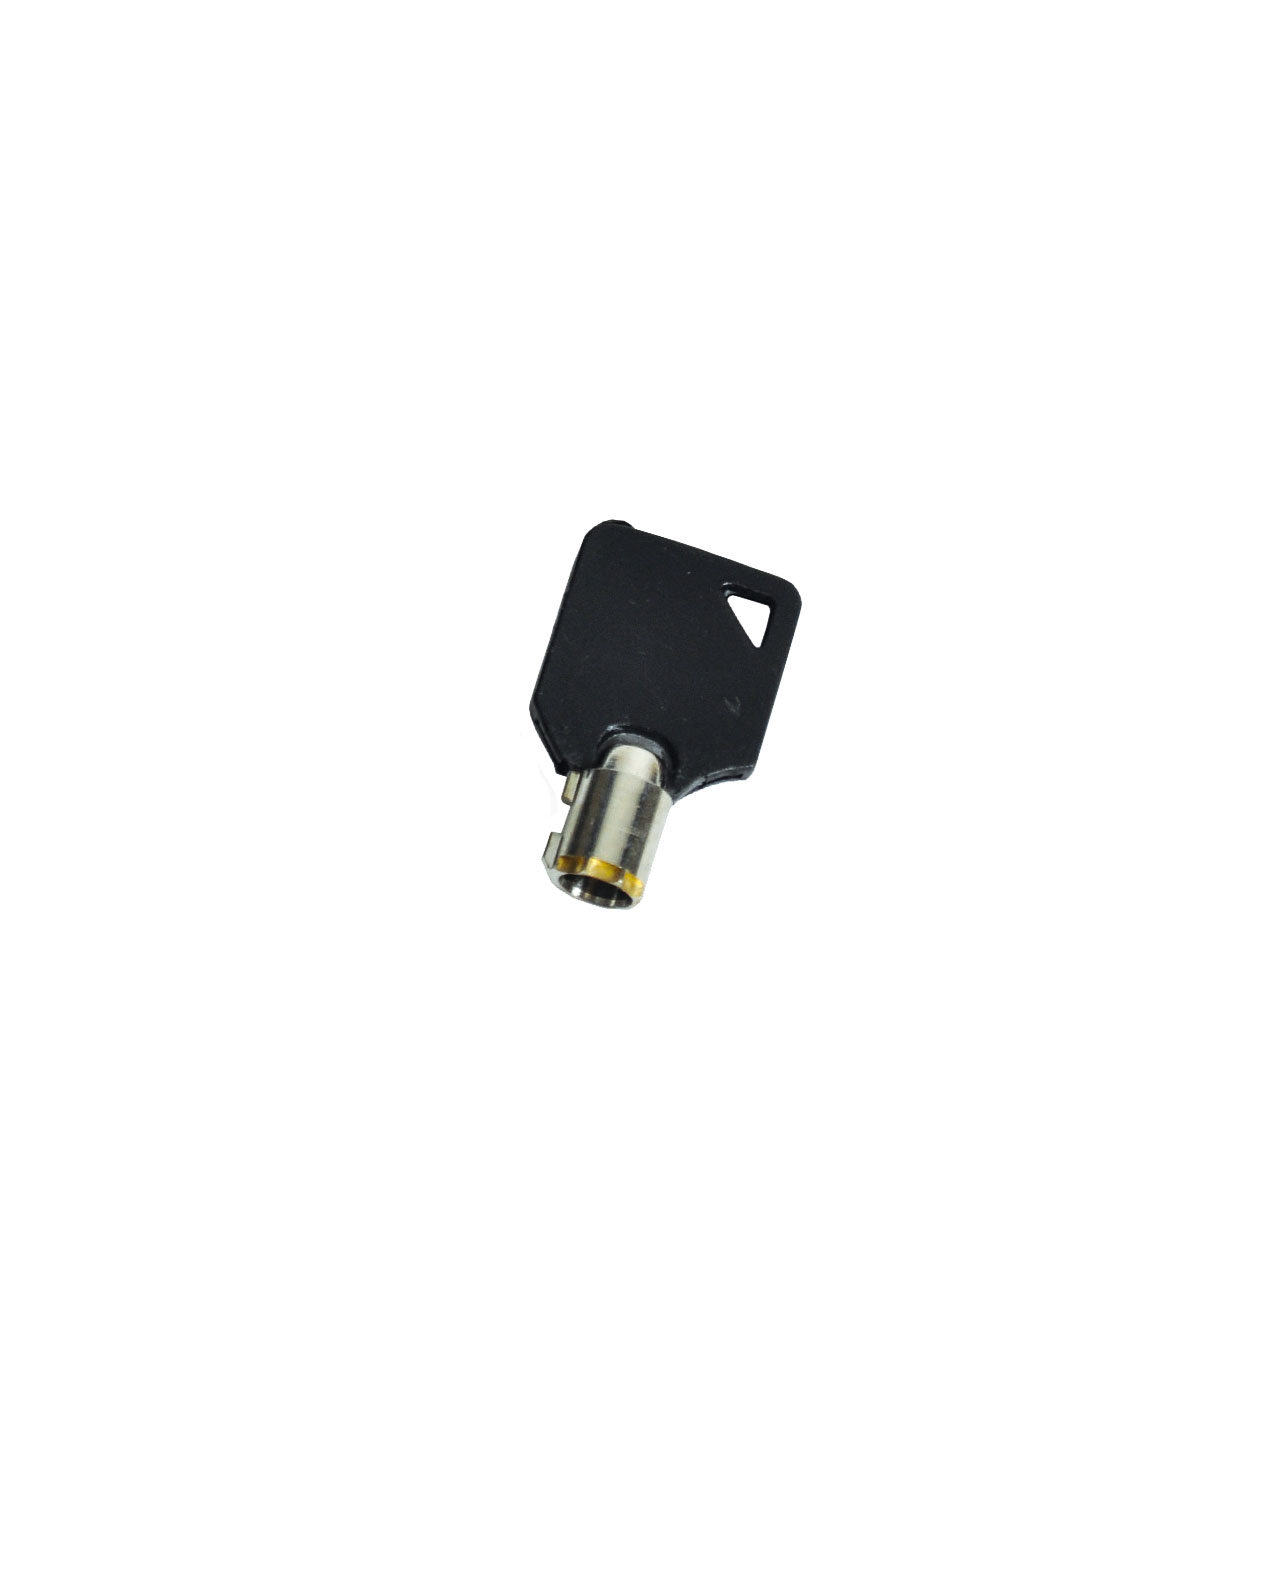 Dosa Lock Replacement Key (Part #: DOSA-PLKEY)